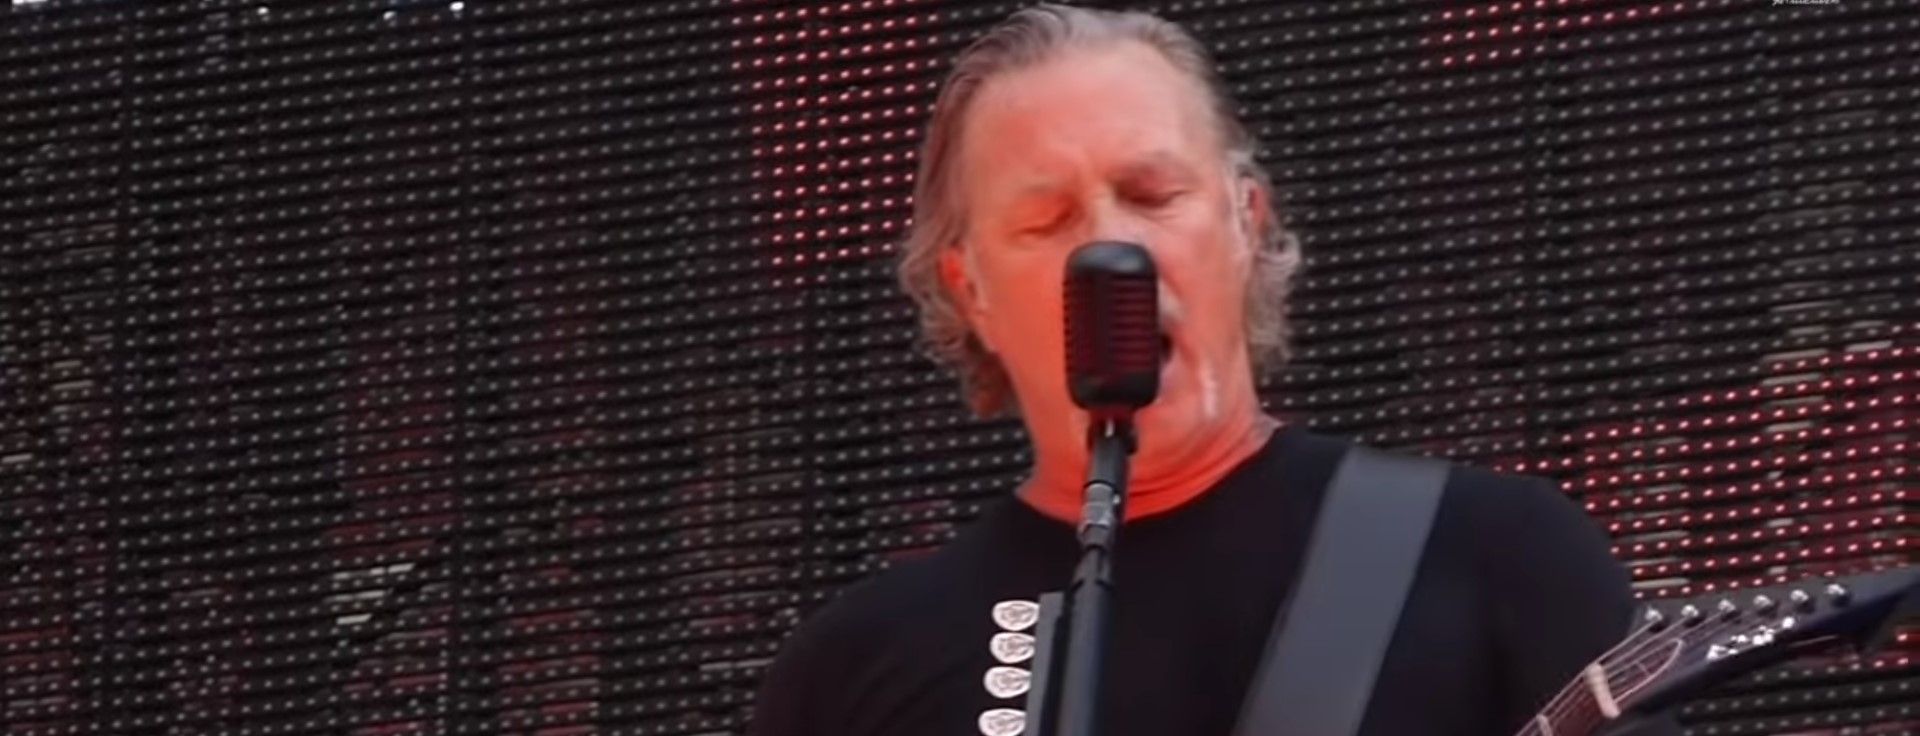 Metallica - The Thing That Should Not Be (Live In Cologne, Germany 2019)